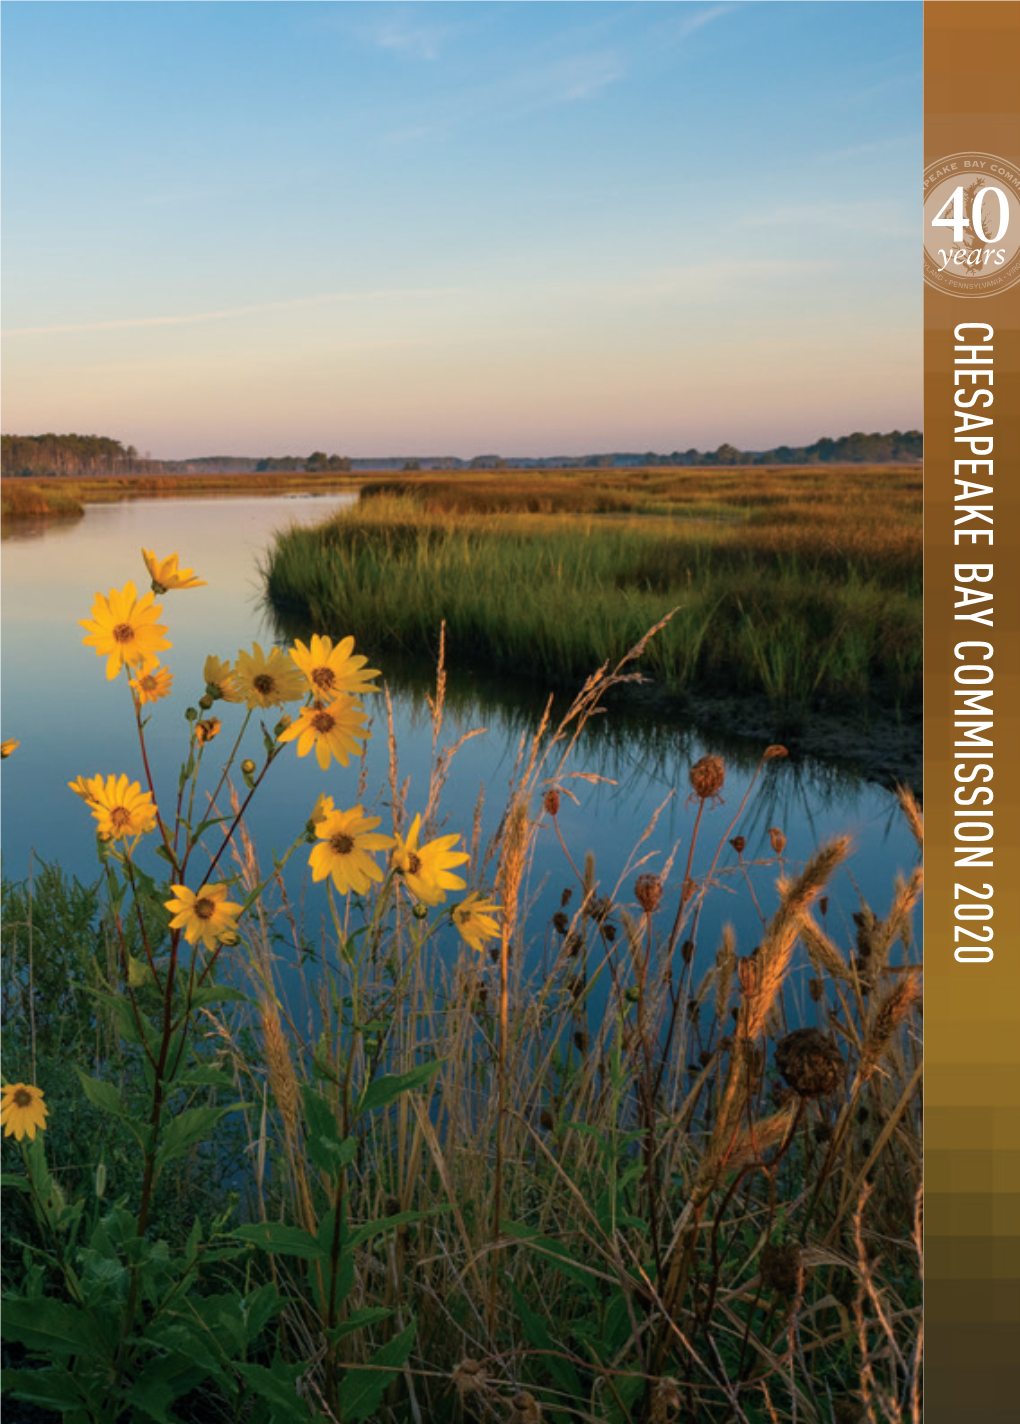 Chesapeake Bay Commission Annual Report 2020